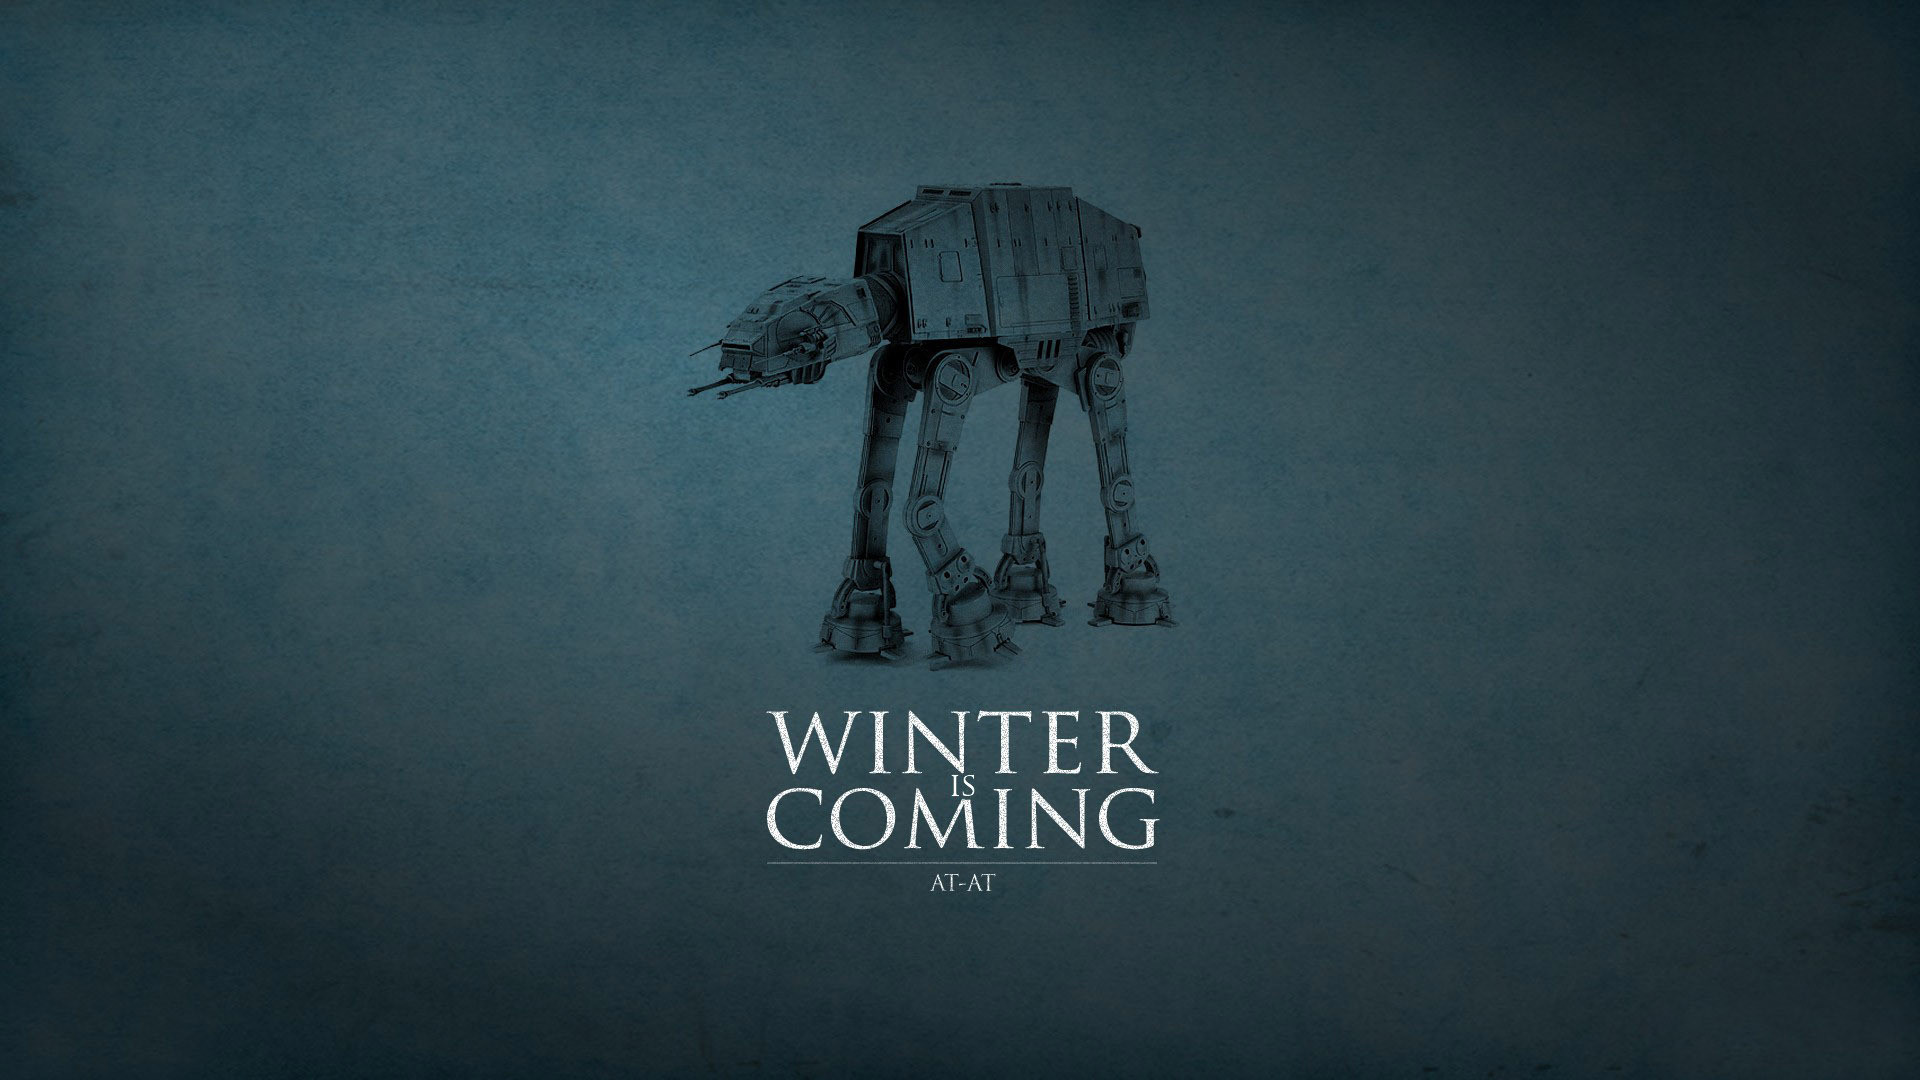 1920x1080 'A Game of Clones' is a series of 'Star Wars' and 'Game of Thrones' mashup  wallpapers designed by Andrew Spear of My Little Geek in honor of the 'Game  of ...